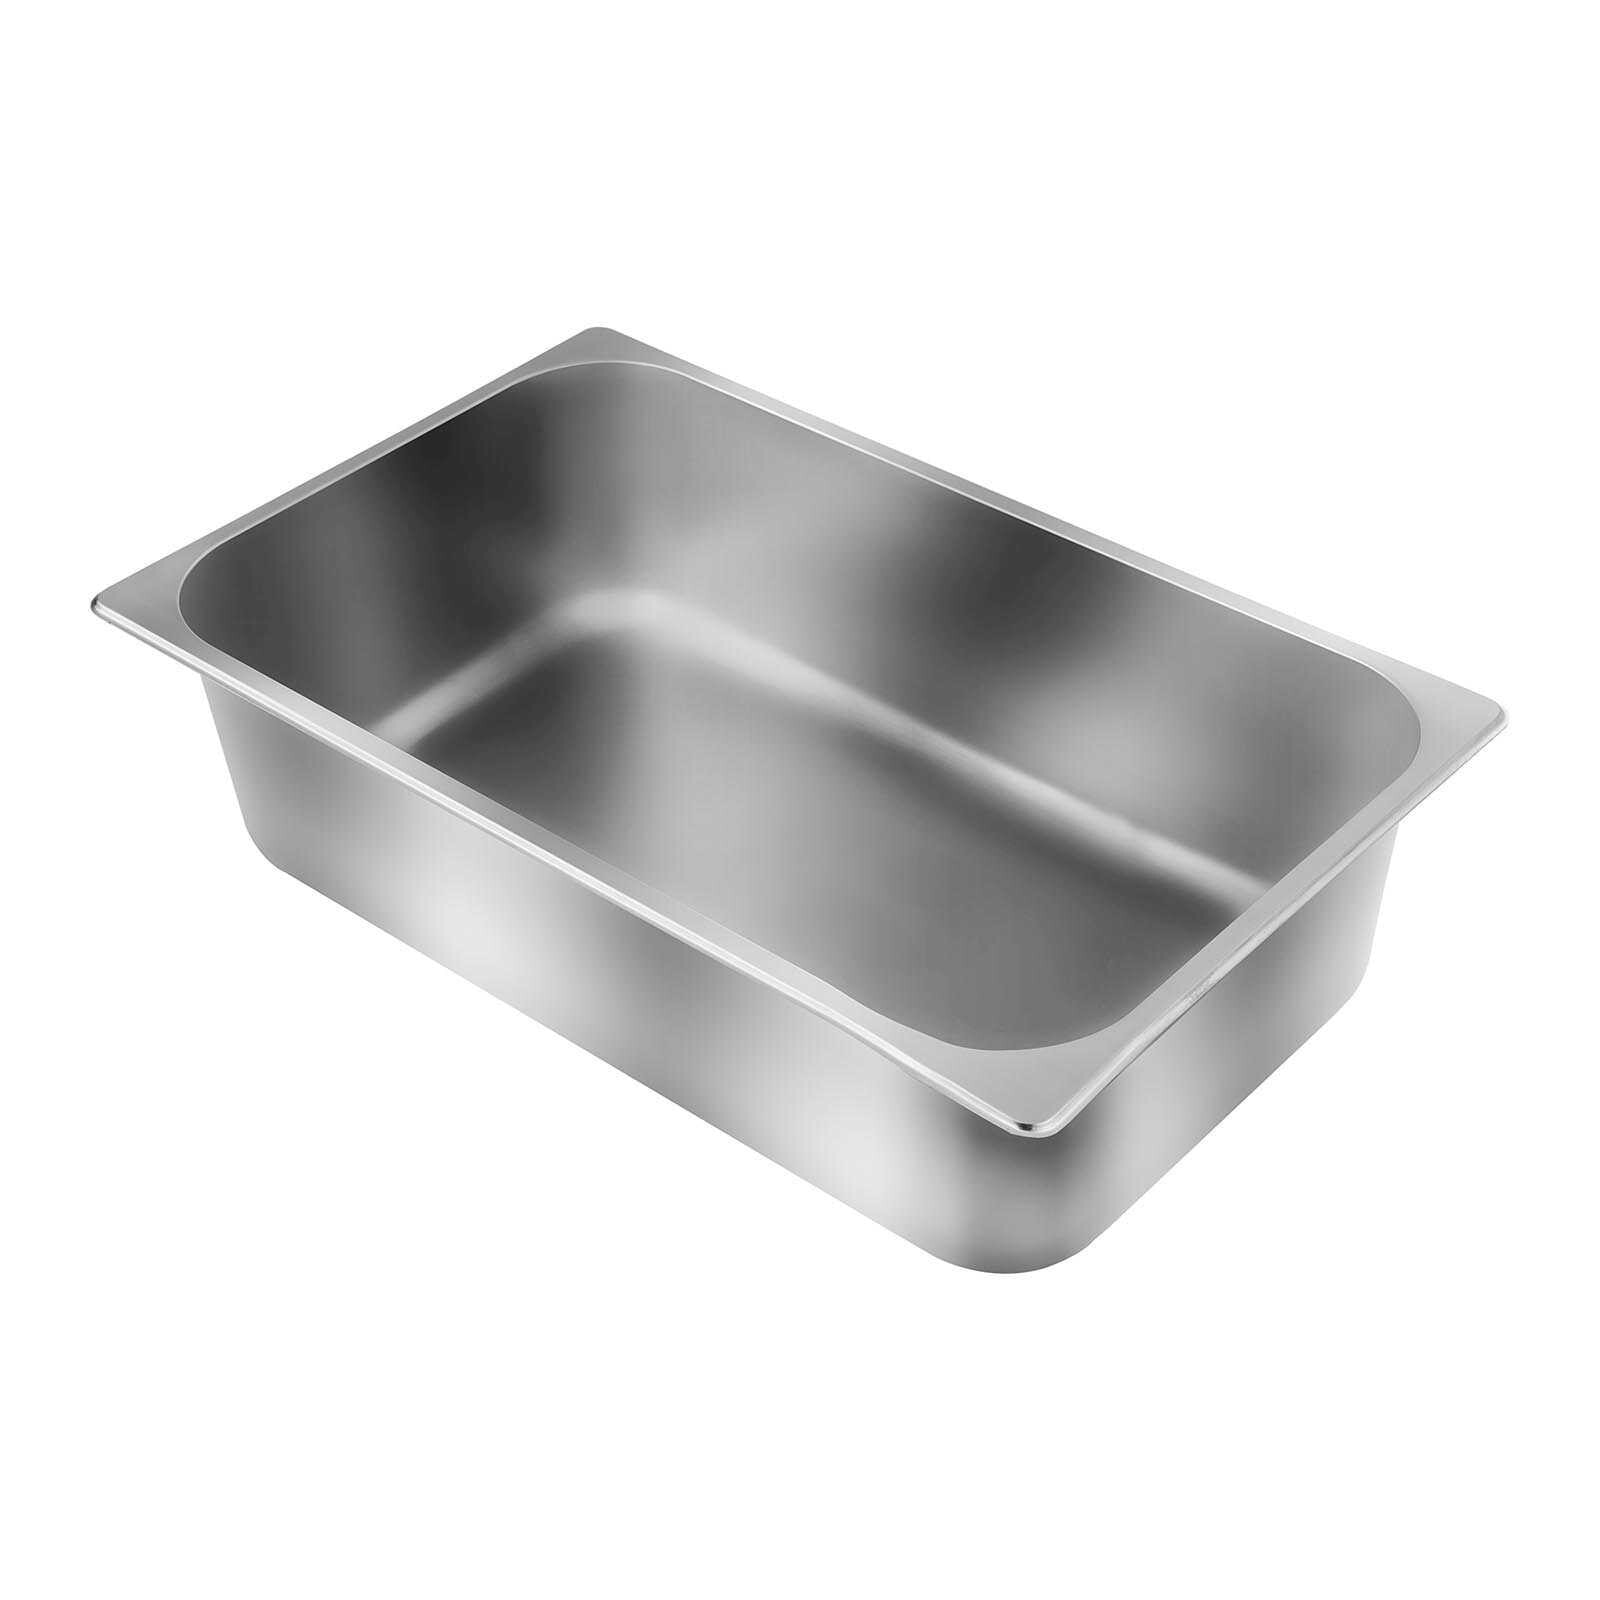 Stainless steel GN 1/1 container, height 15cm 19L